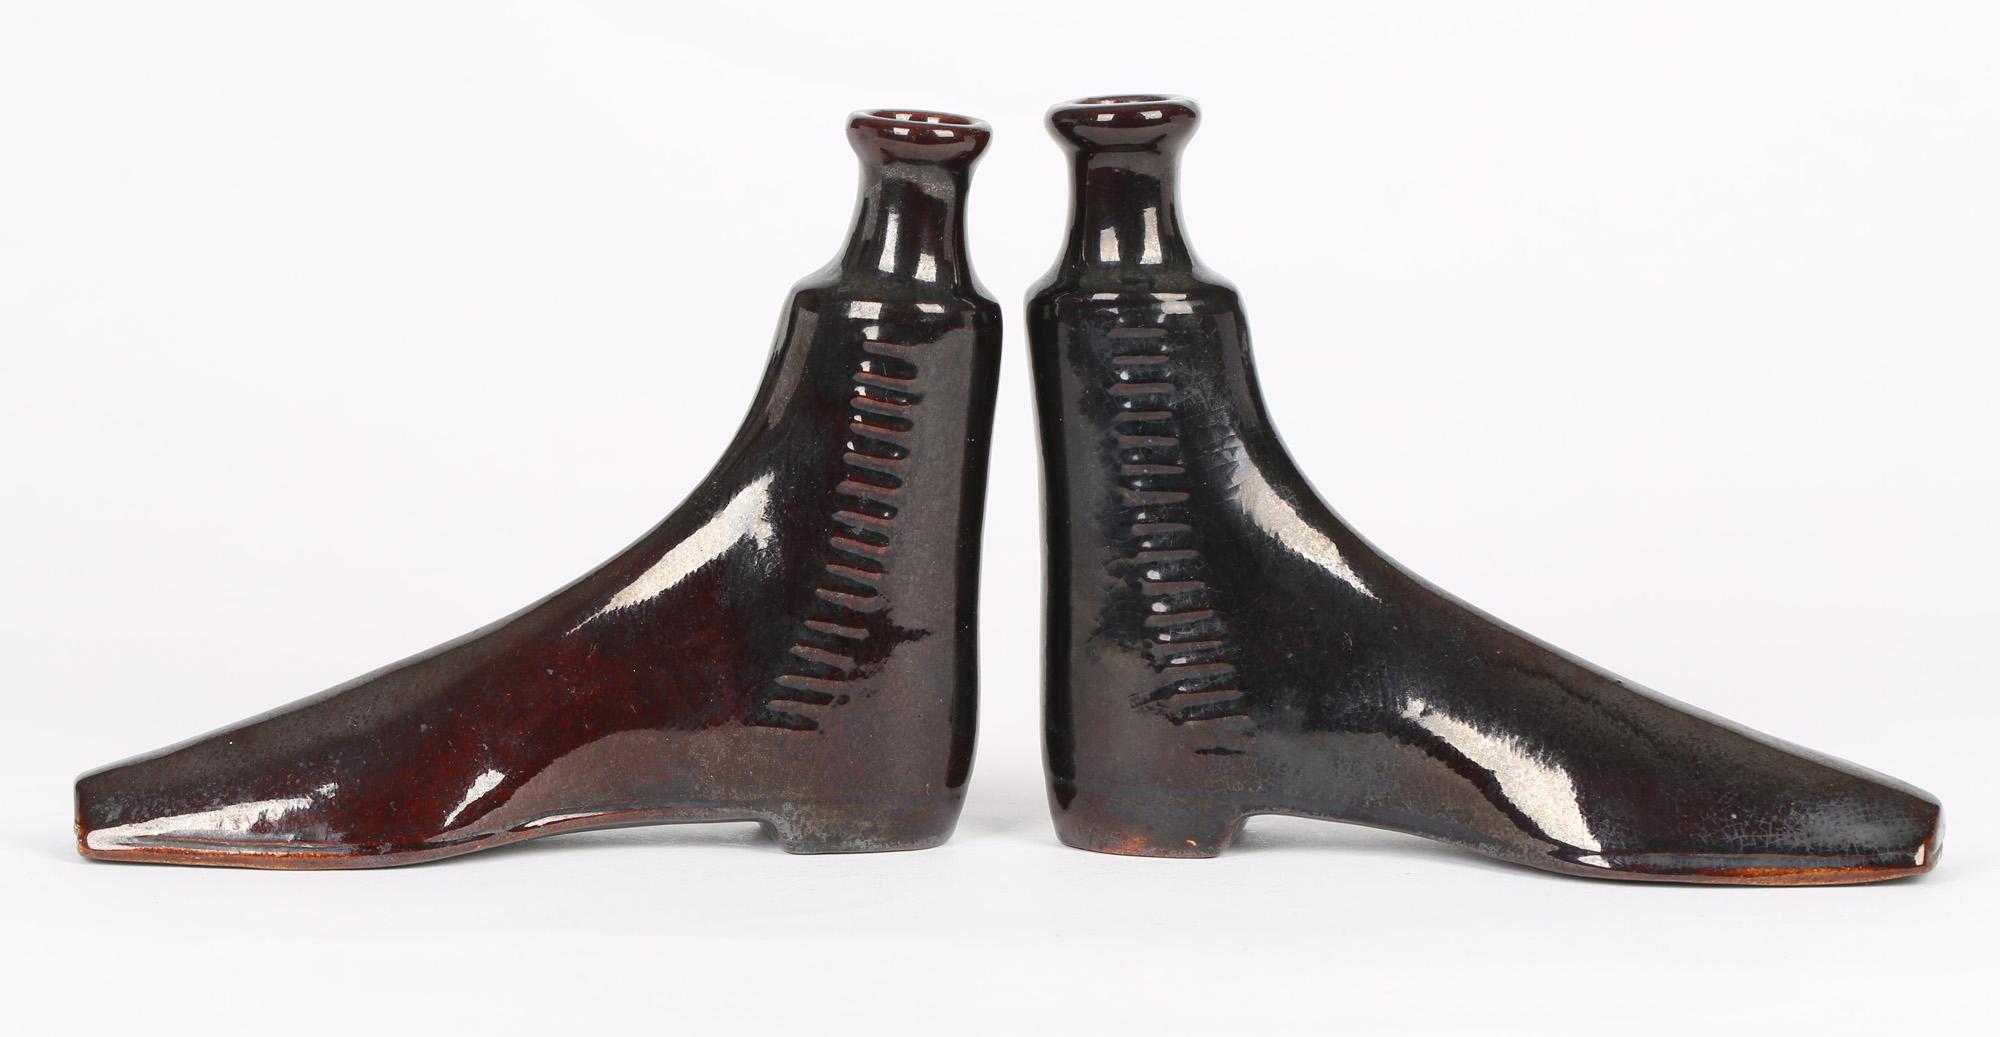 A fine pair of antique English treacle glazed pottery spirit flasks modeled as ankle boots applied with laces to the side and probably dating from around the mid 19th century. The flasks are hollow potted with raised filler/pourer which would